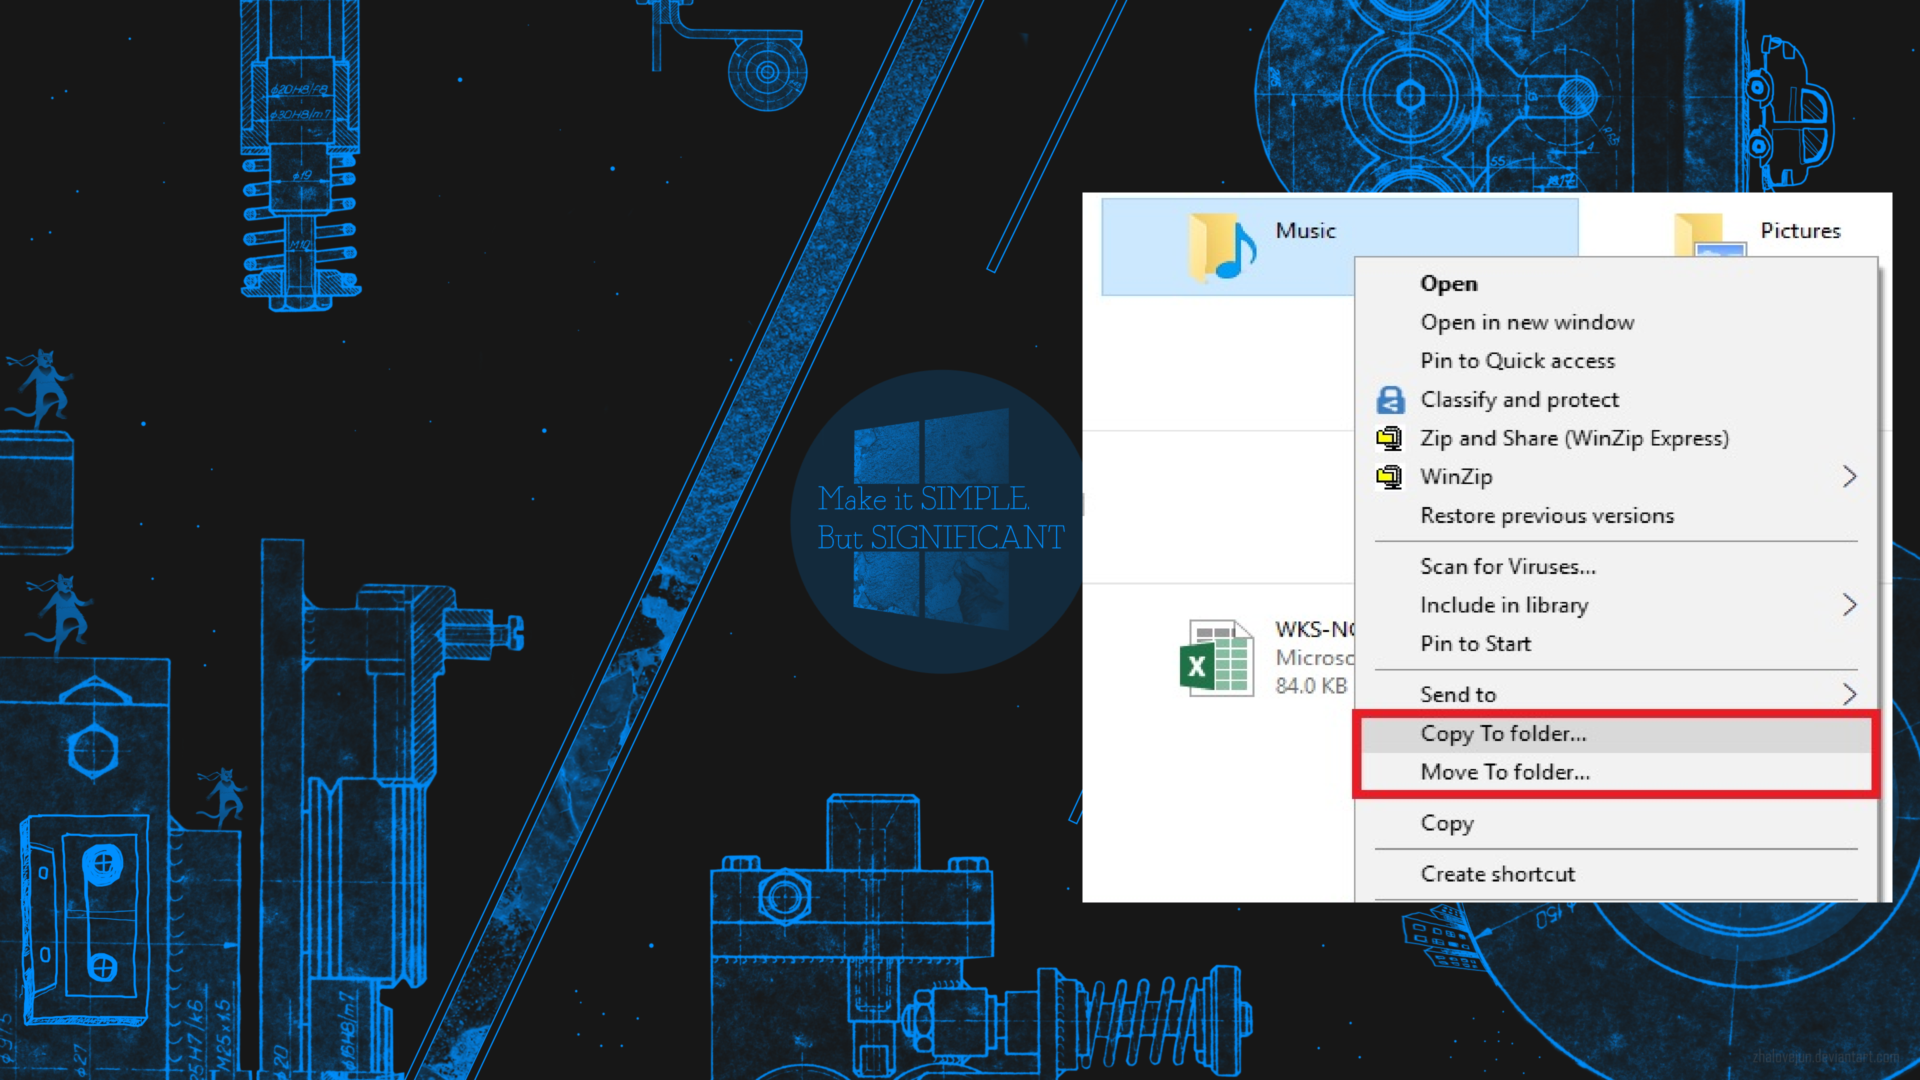 How to Add Copy To and Move To Folder in the context Menu in windows 10?